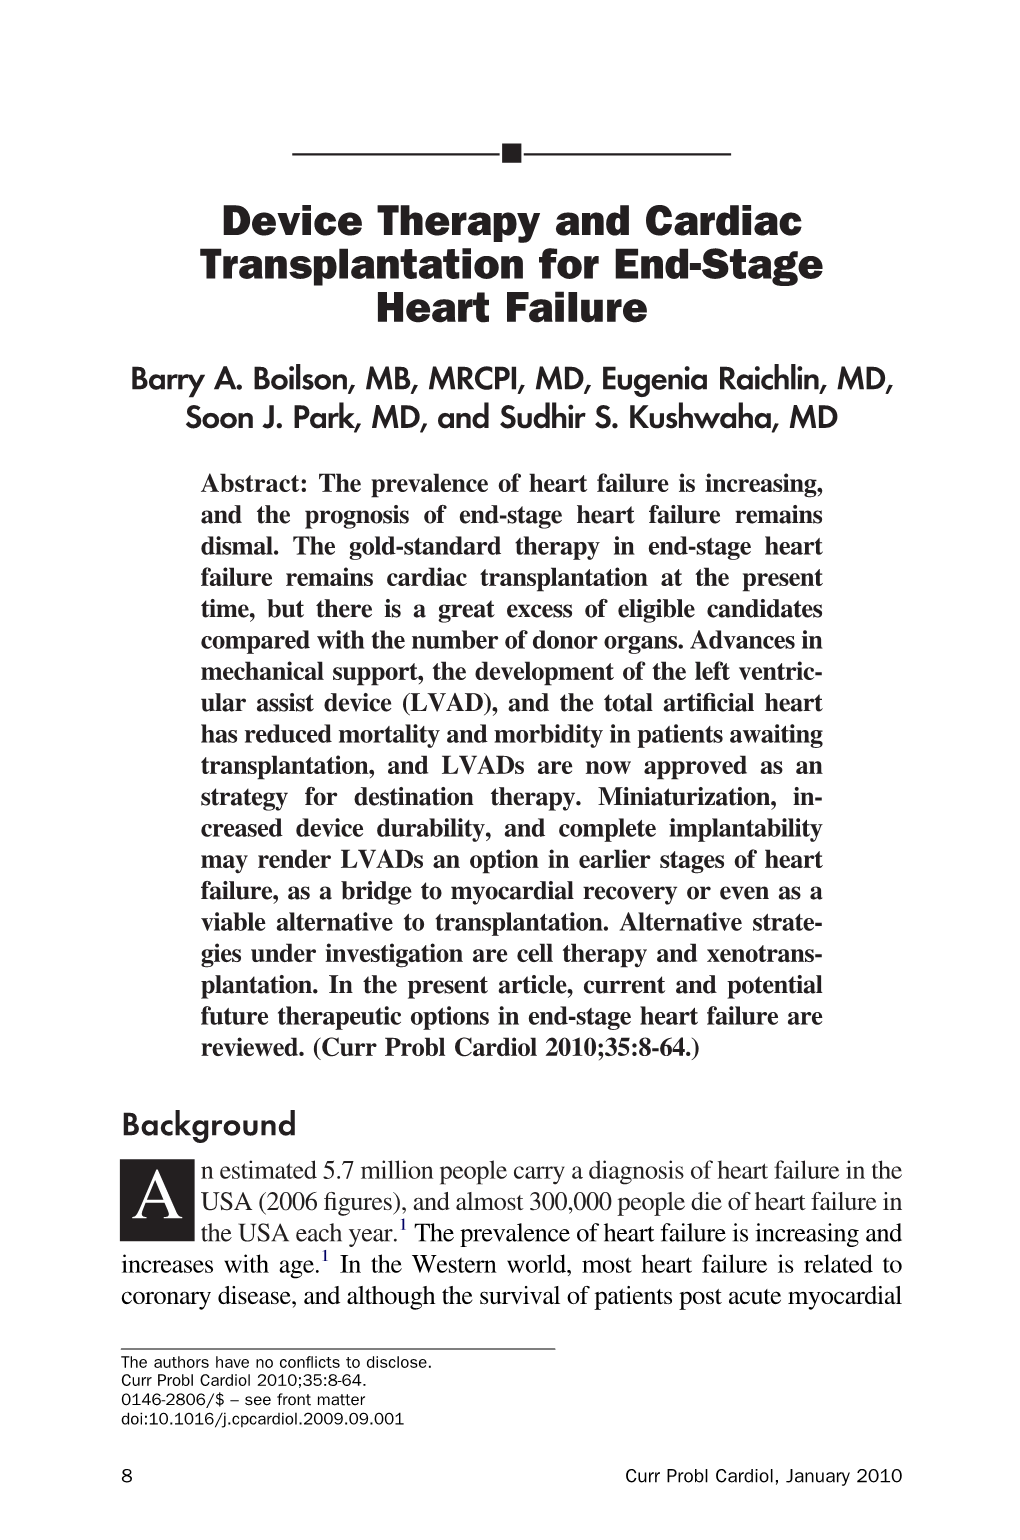 Device Therapy and Cardiac Transplantation for End-Stage Heart Failure